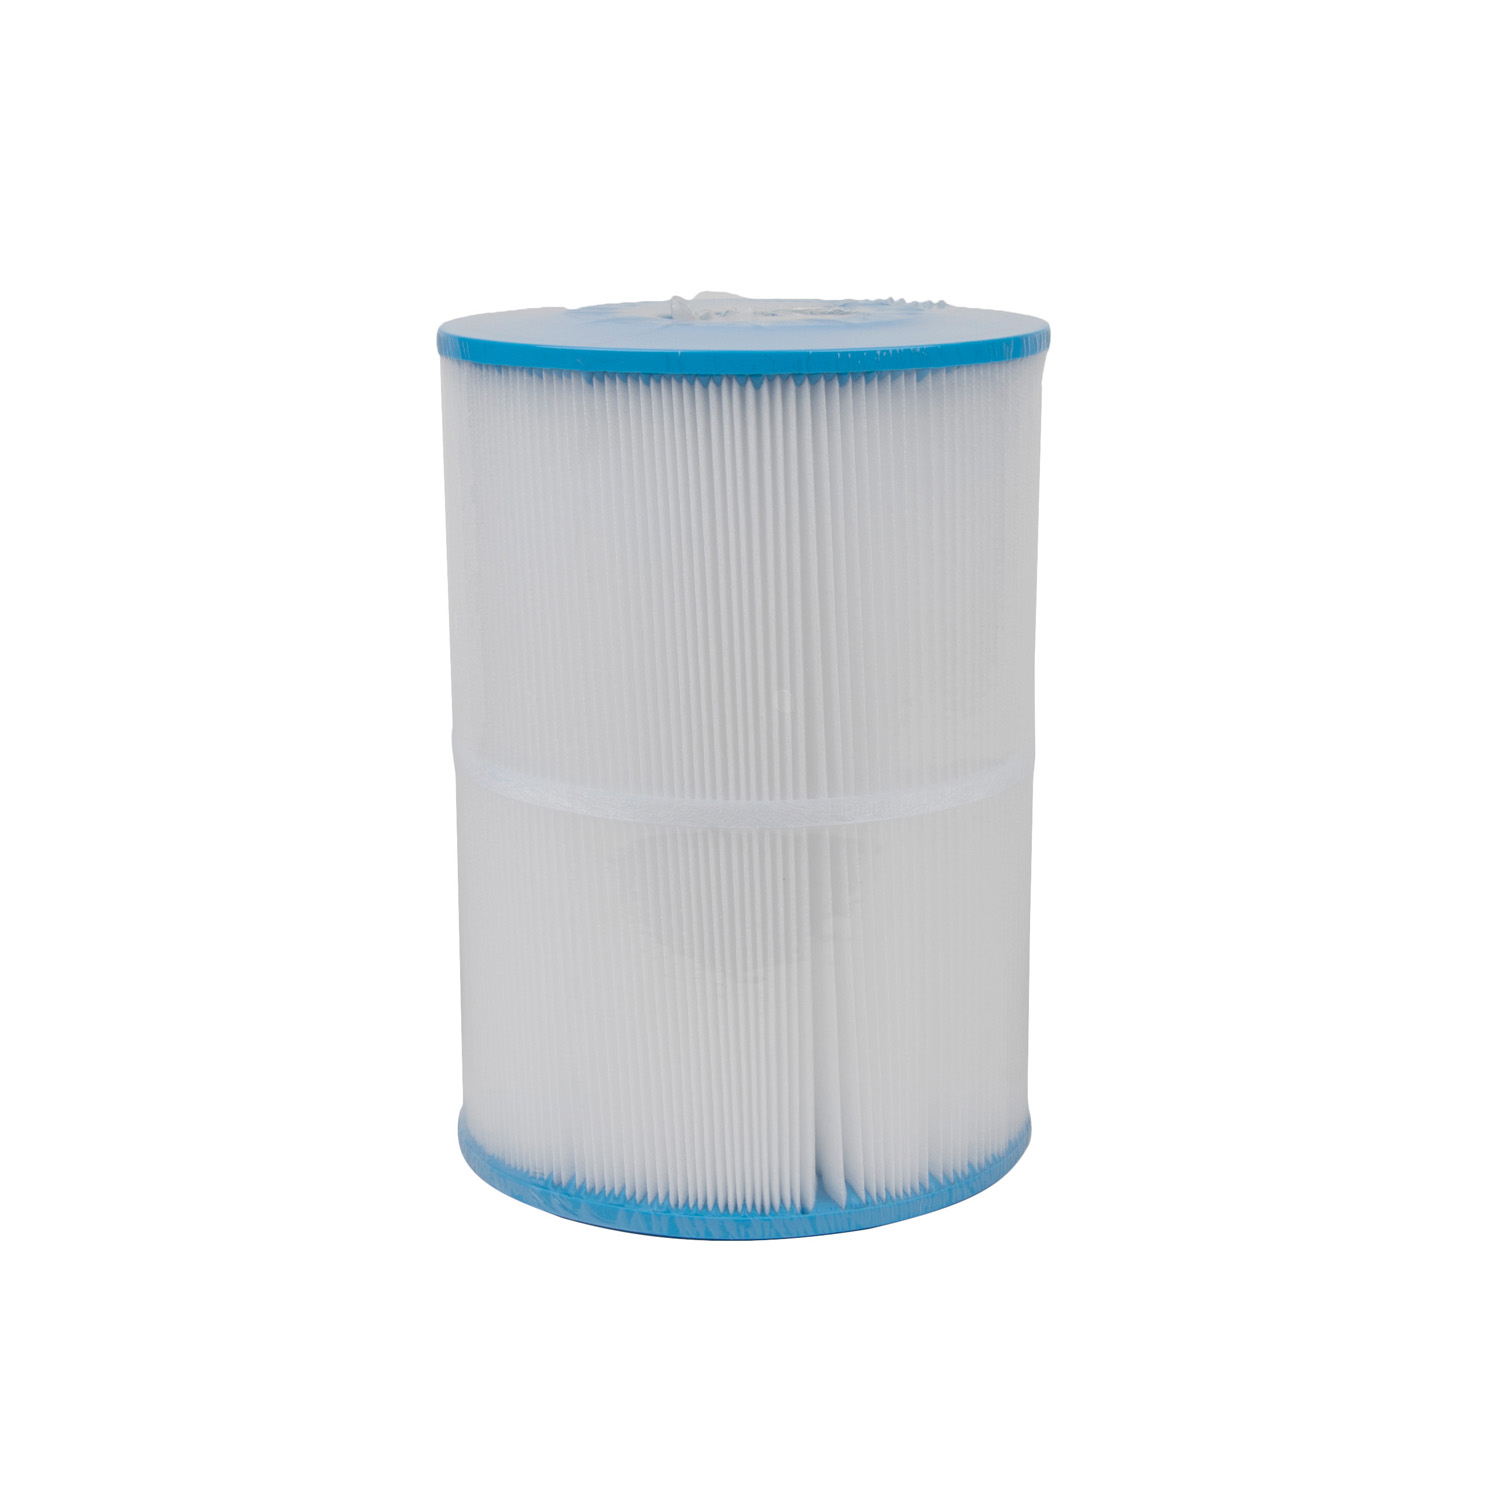 0801143157 Sea Recovery filter